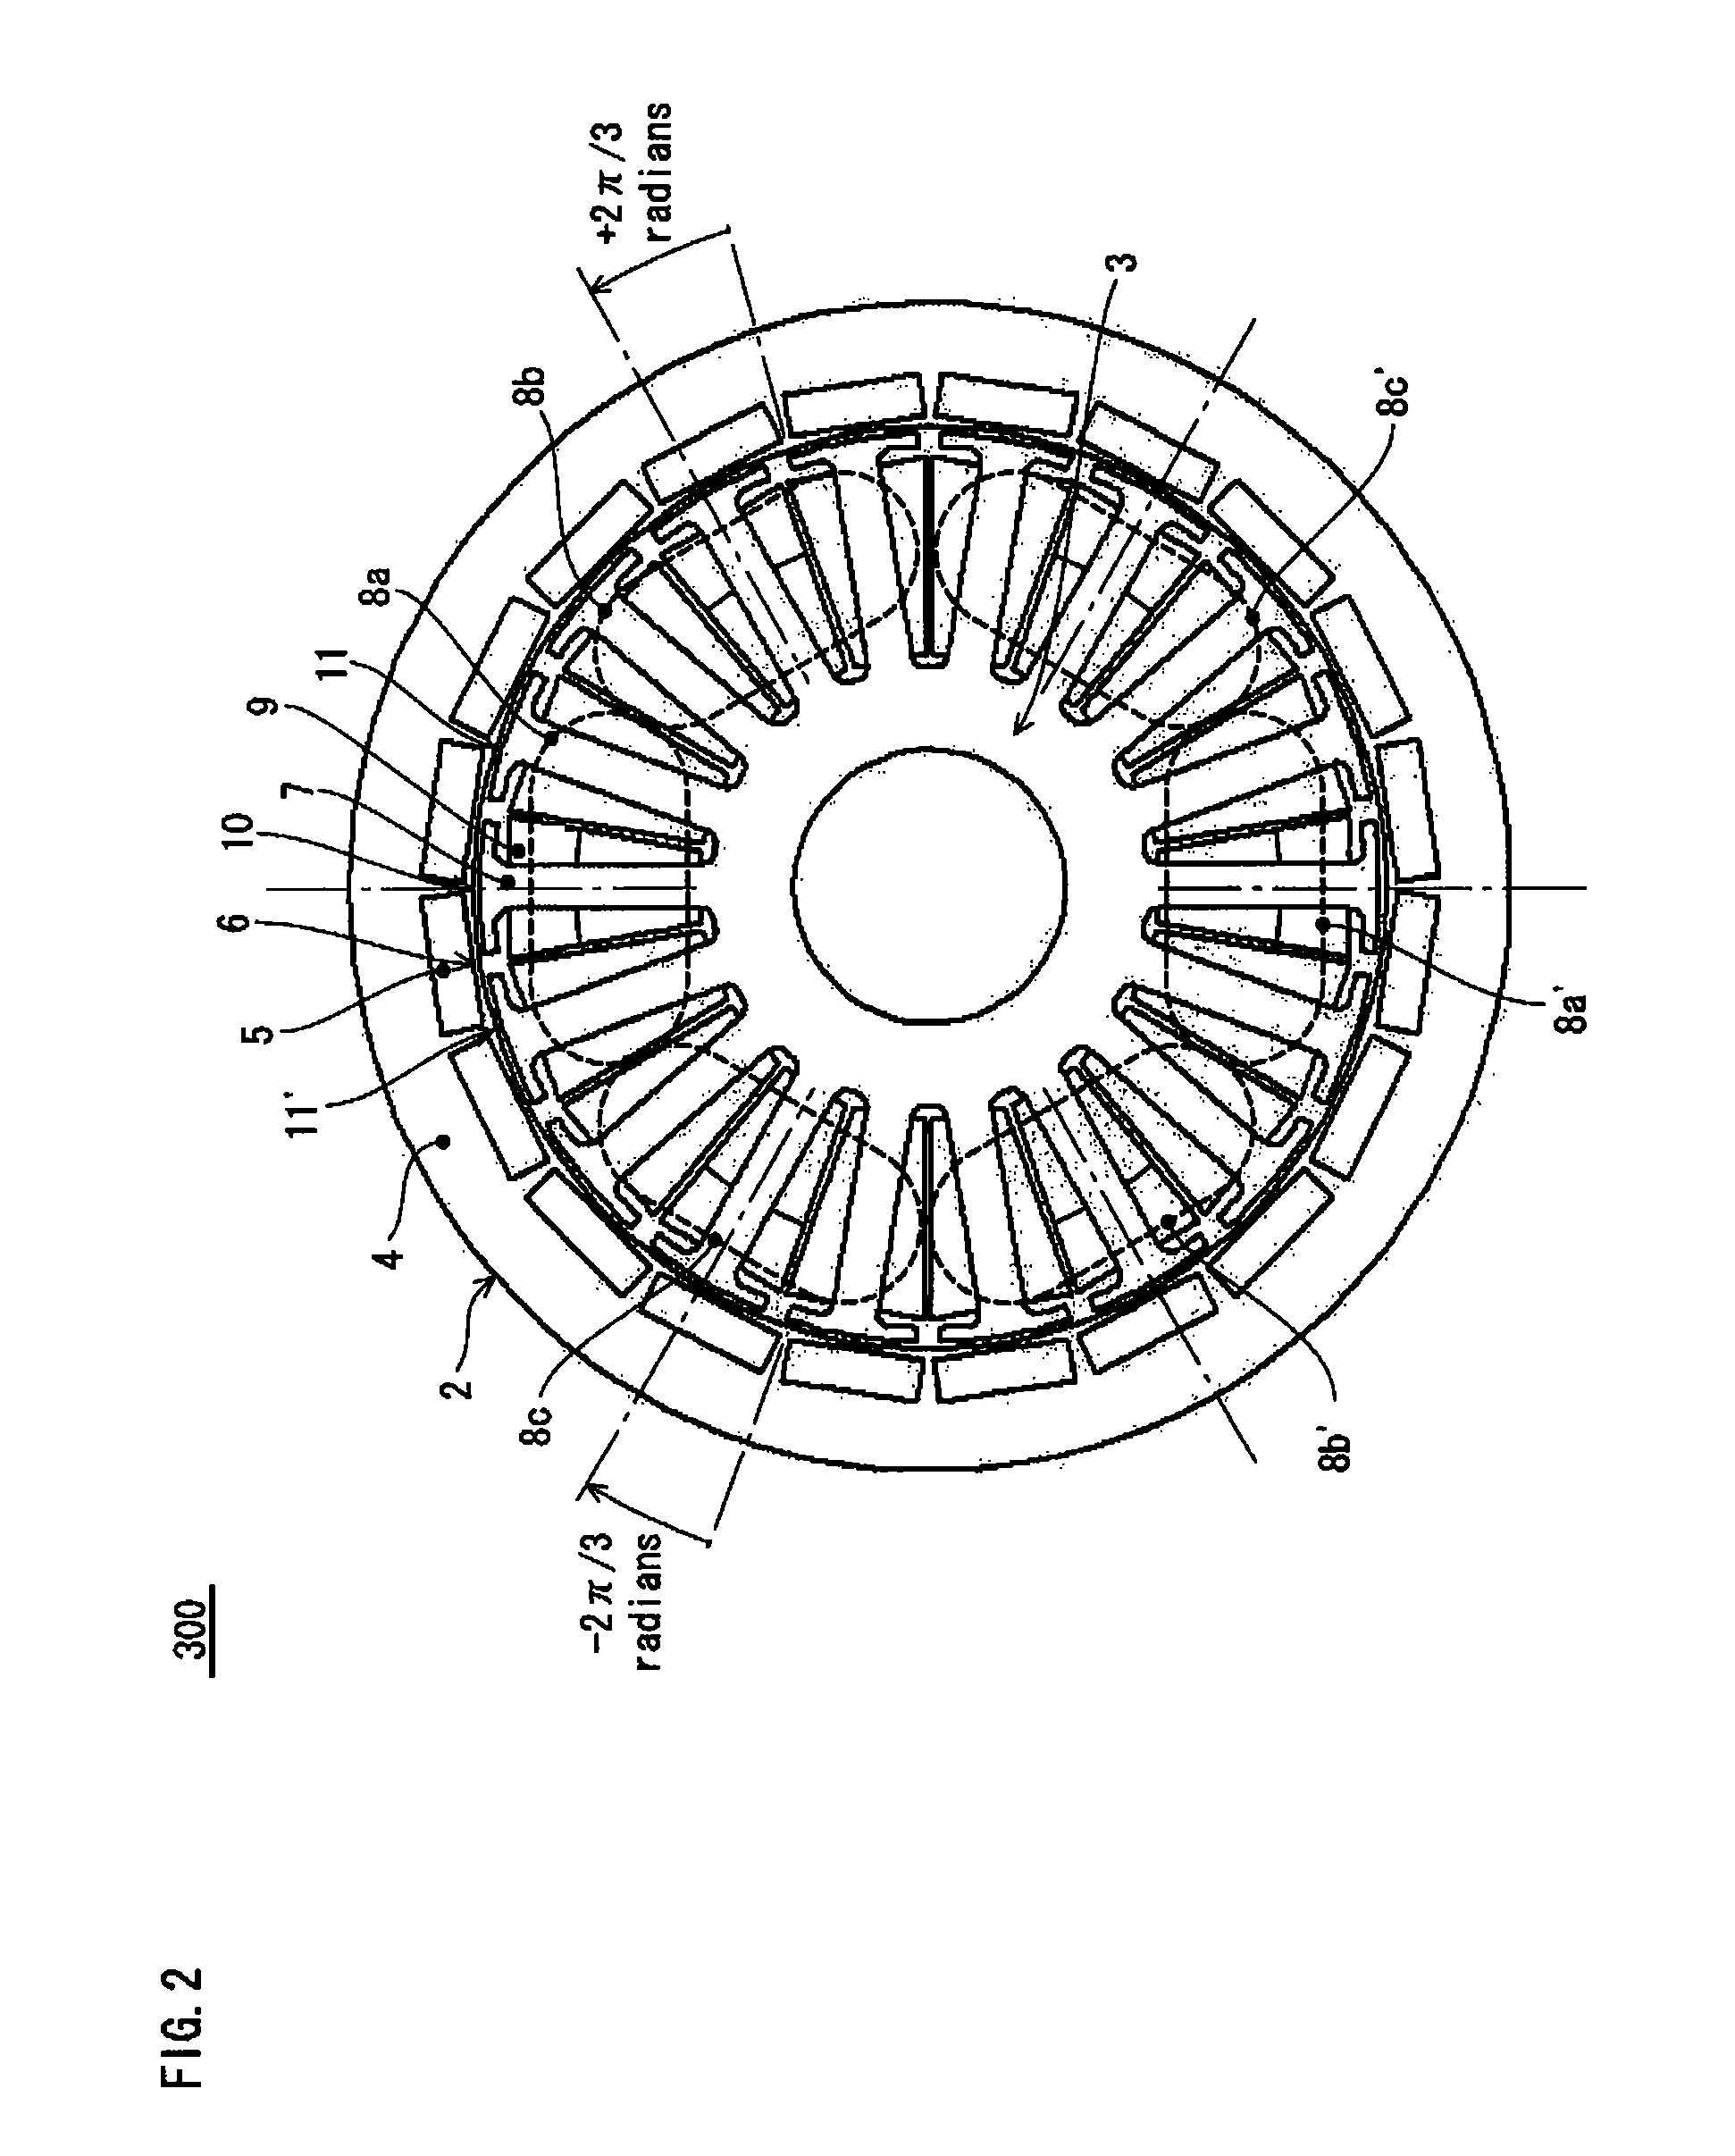 Synchronous electric motor system